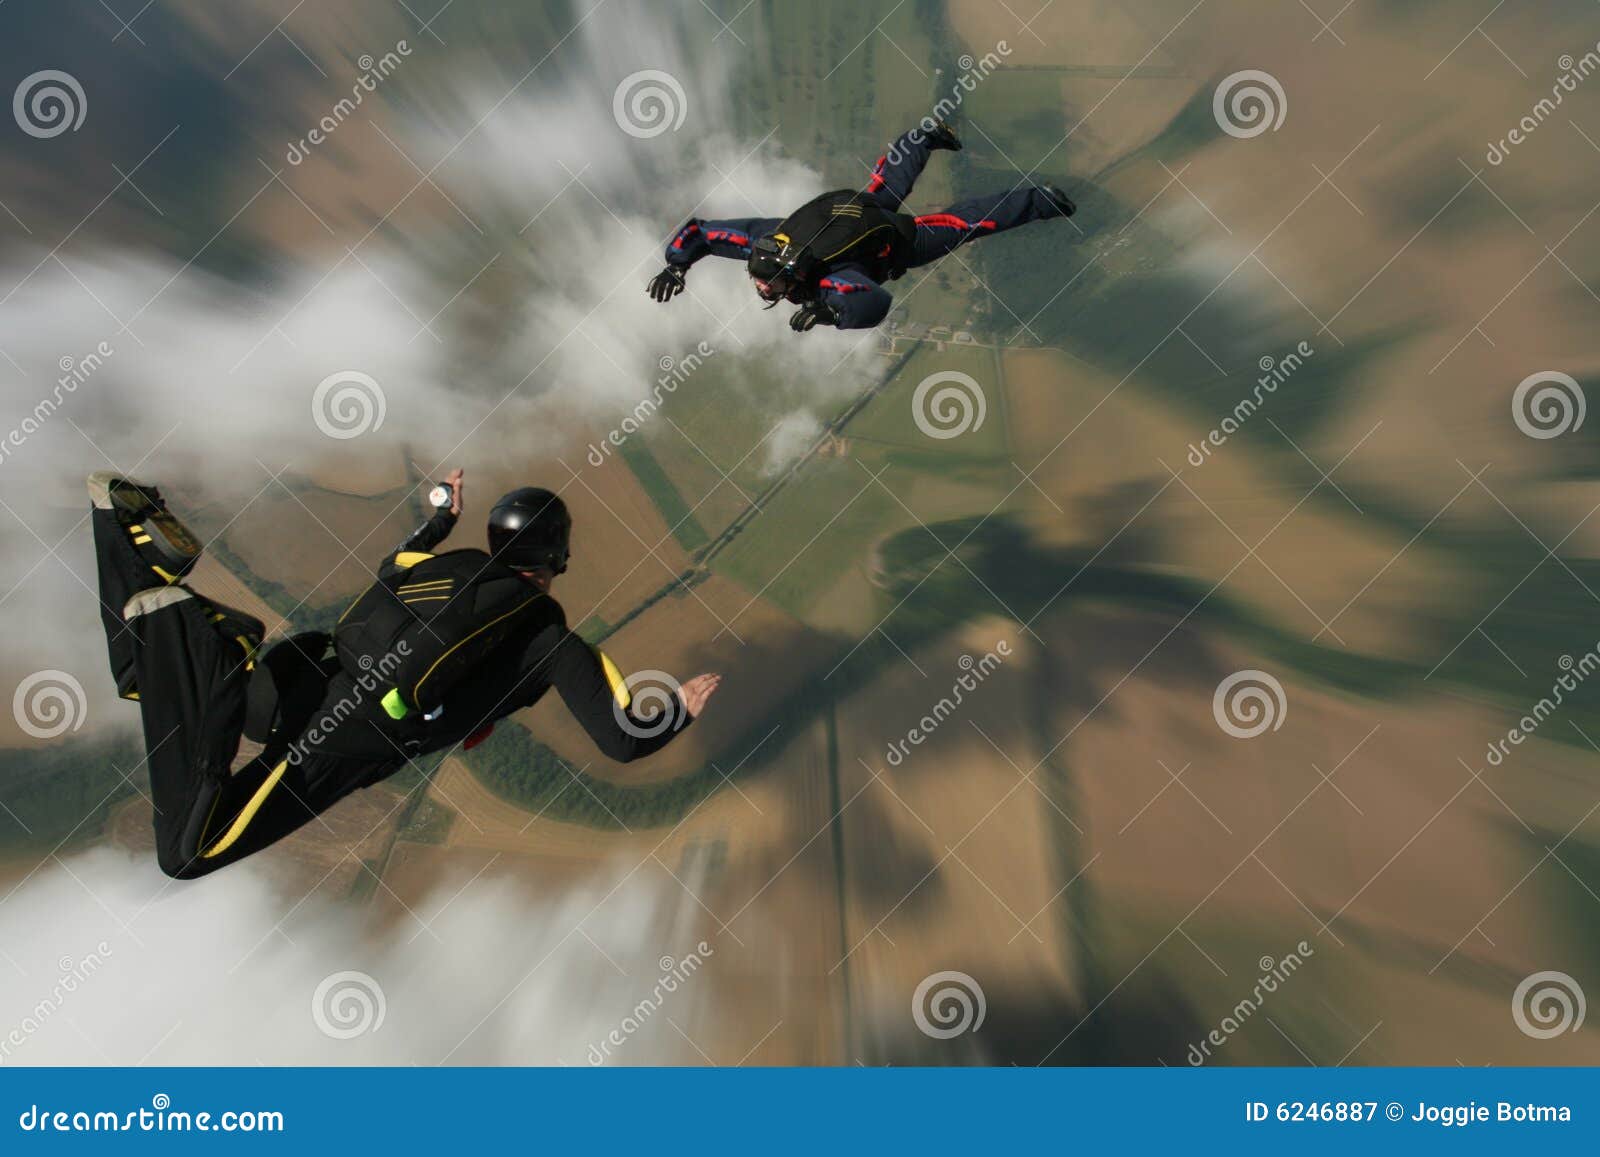 skydivers in freefall